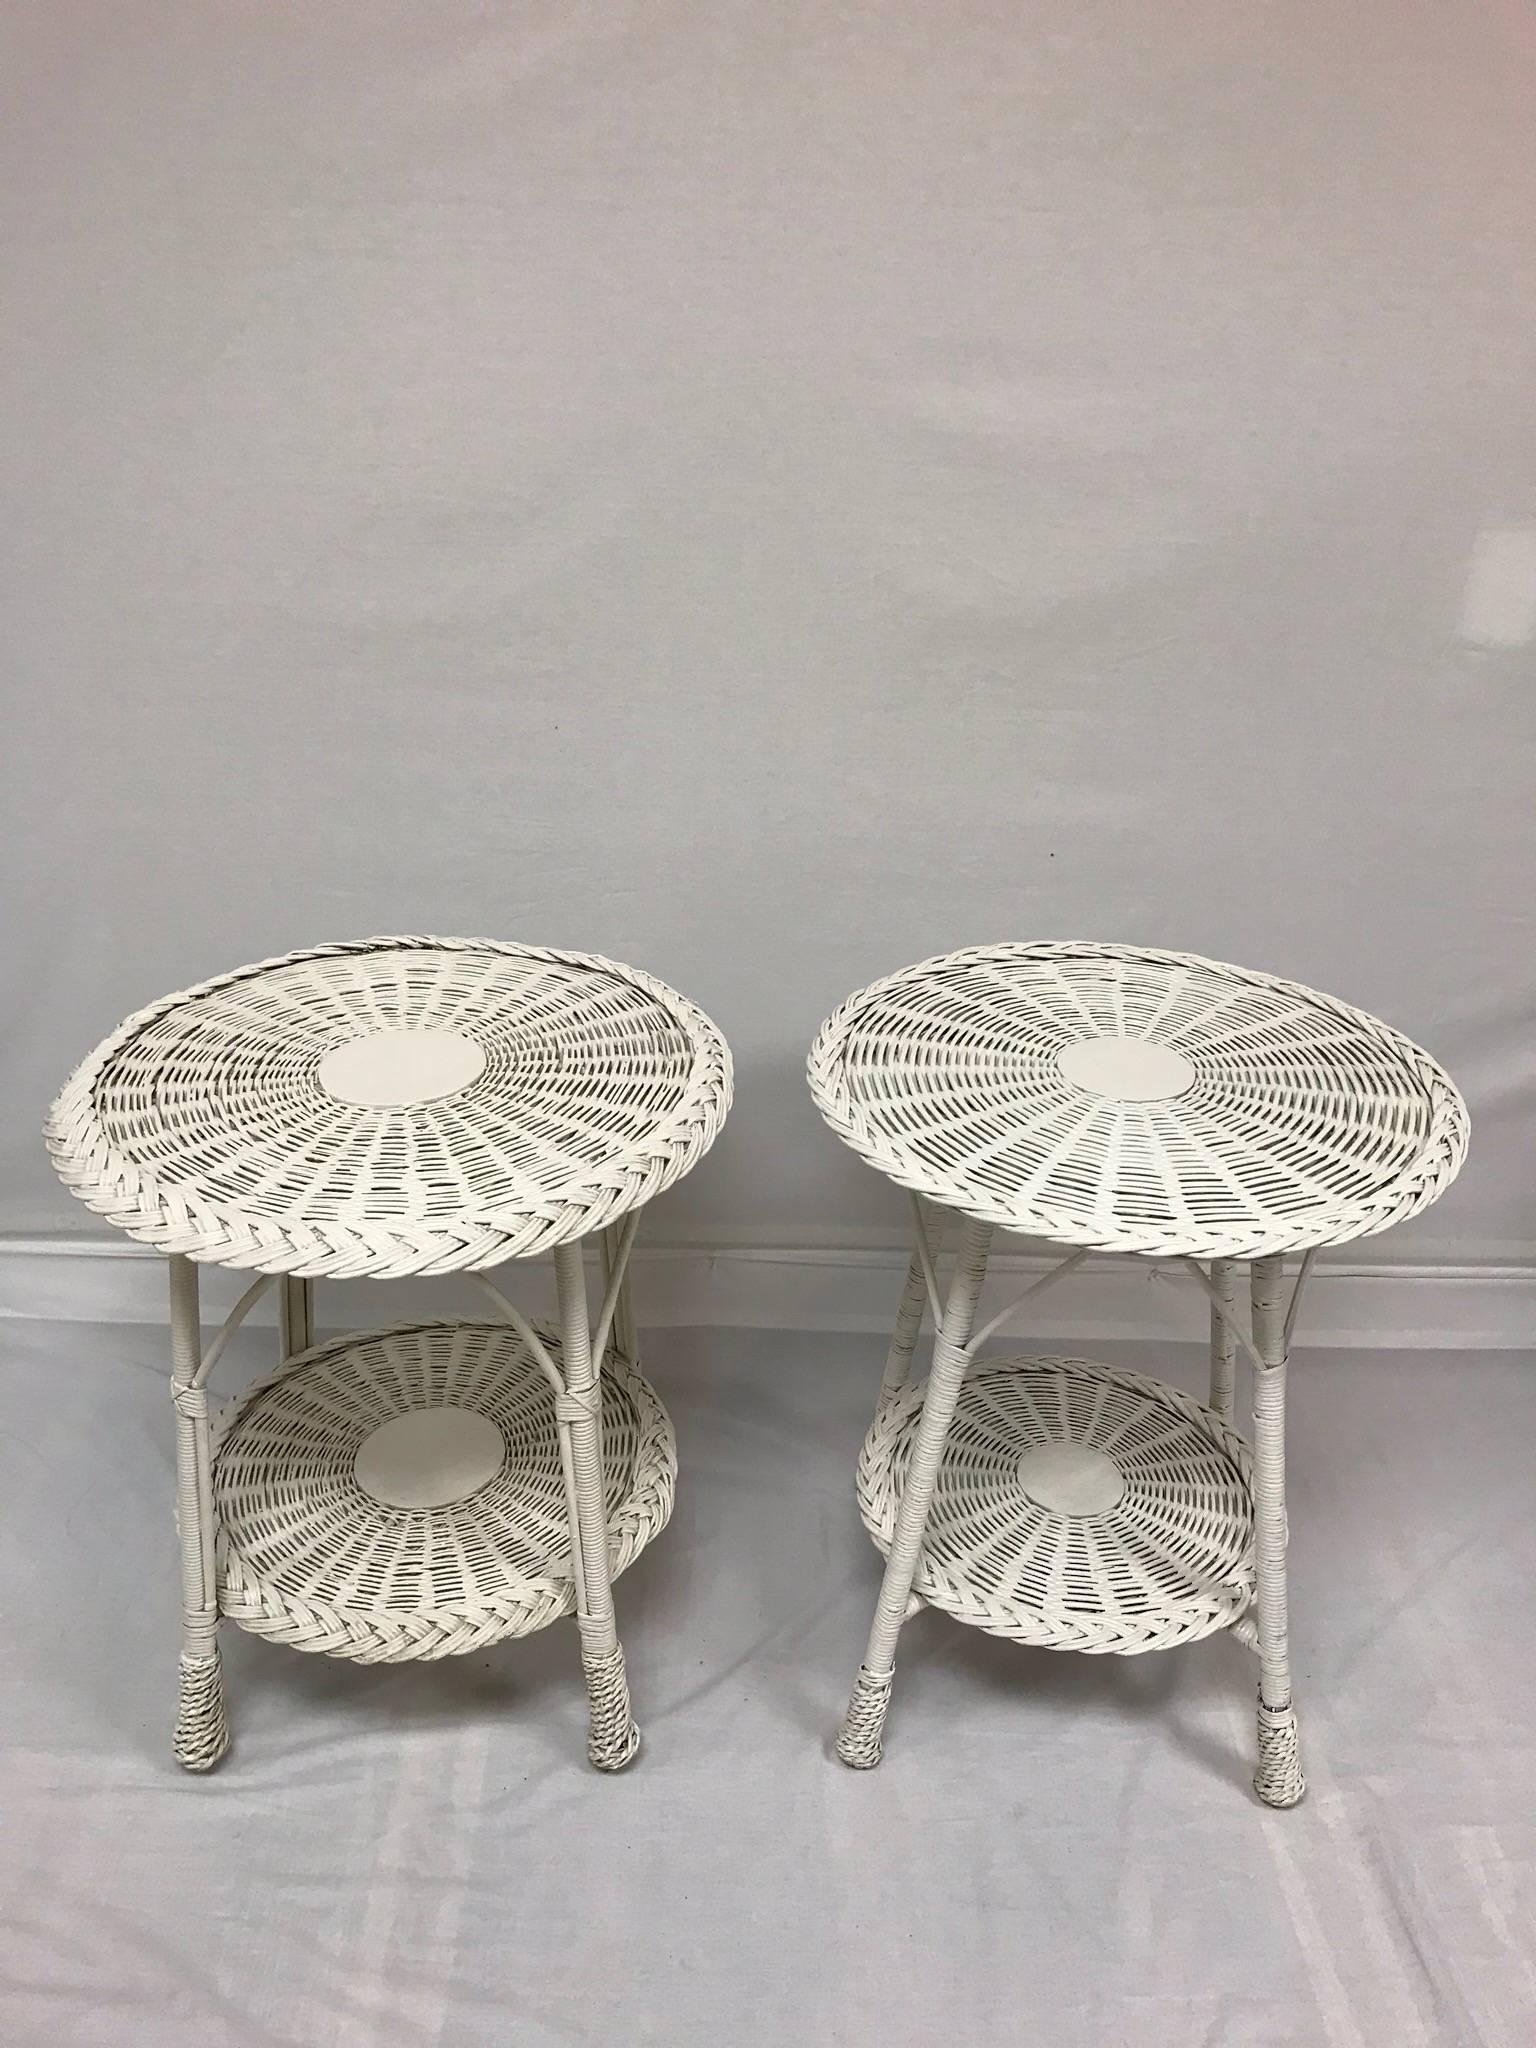 A set of vintage early 20th century white-painted wicker tables that would be perfection upon a porch or within a sun room. Stack piles of books or verdant ferns upon the top or low-to-base shelf for form marries function. Classic Americana! Please